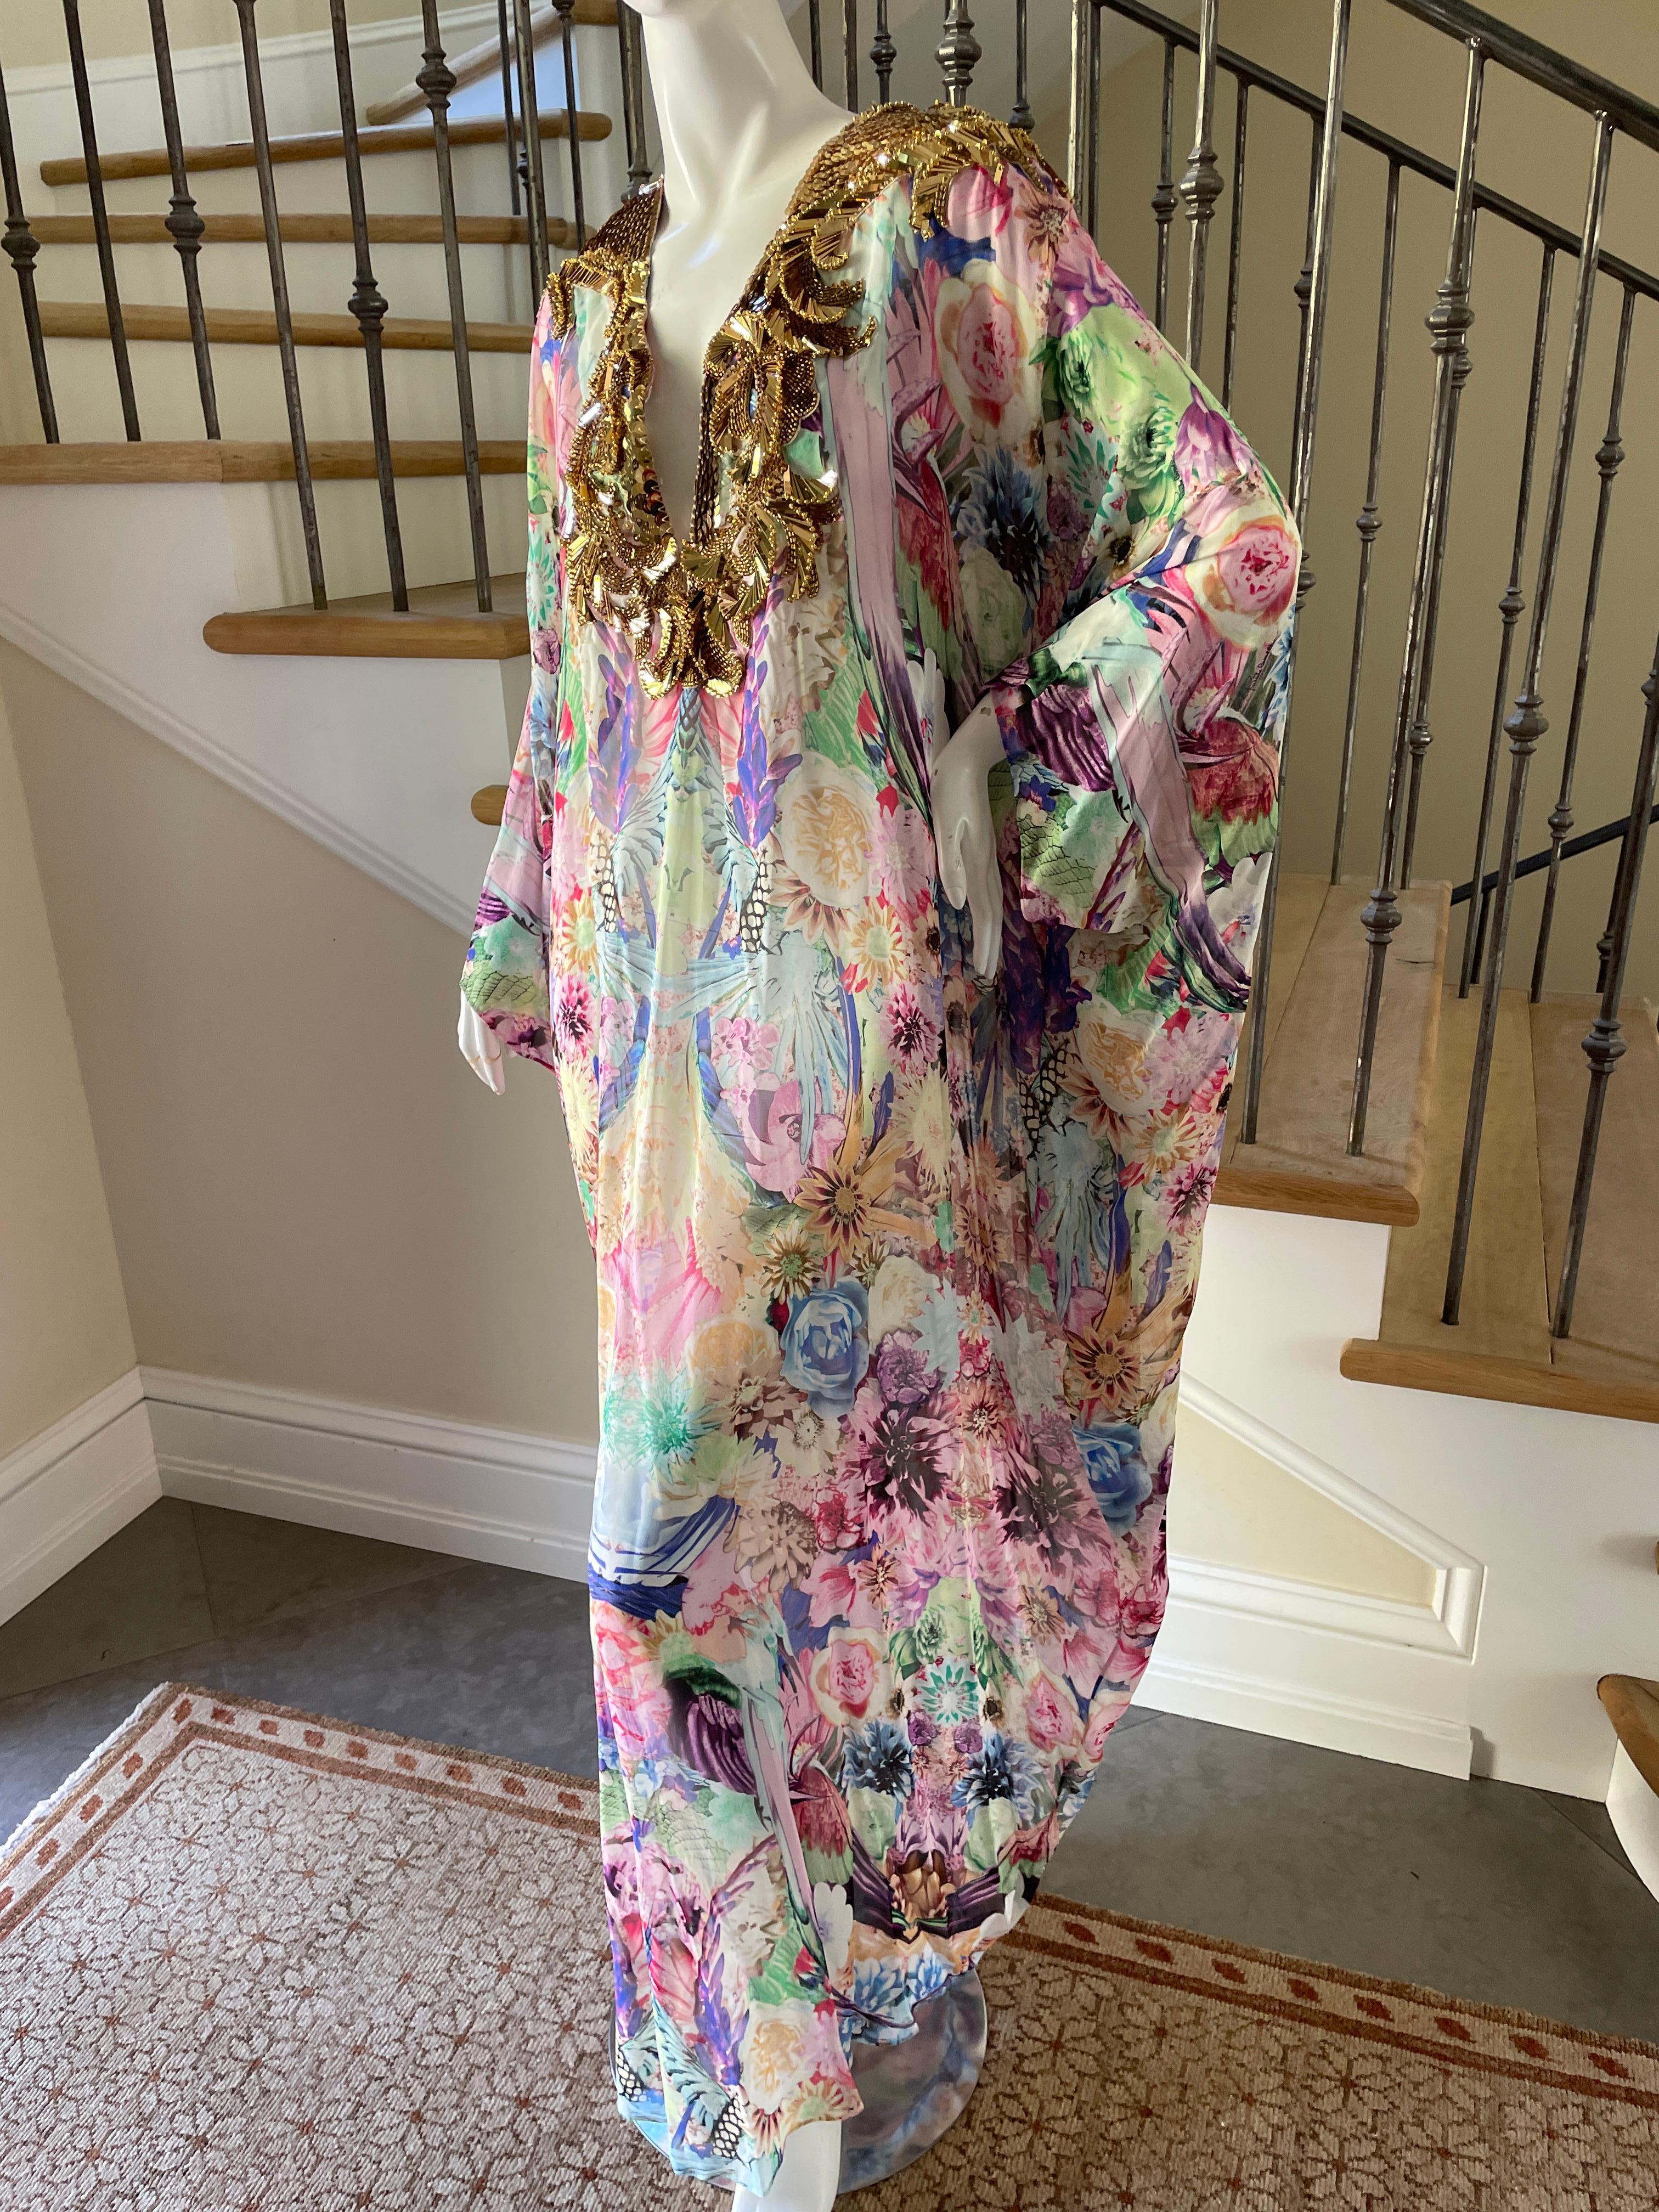 Roberto Cavalli Vintage SIlk Caftan Dress with Gold Embellished Yoke Collar In Excellent Condition For Sale In Cloverdale, CA